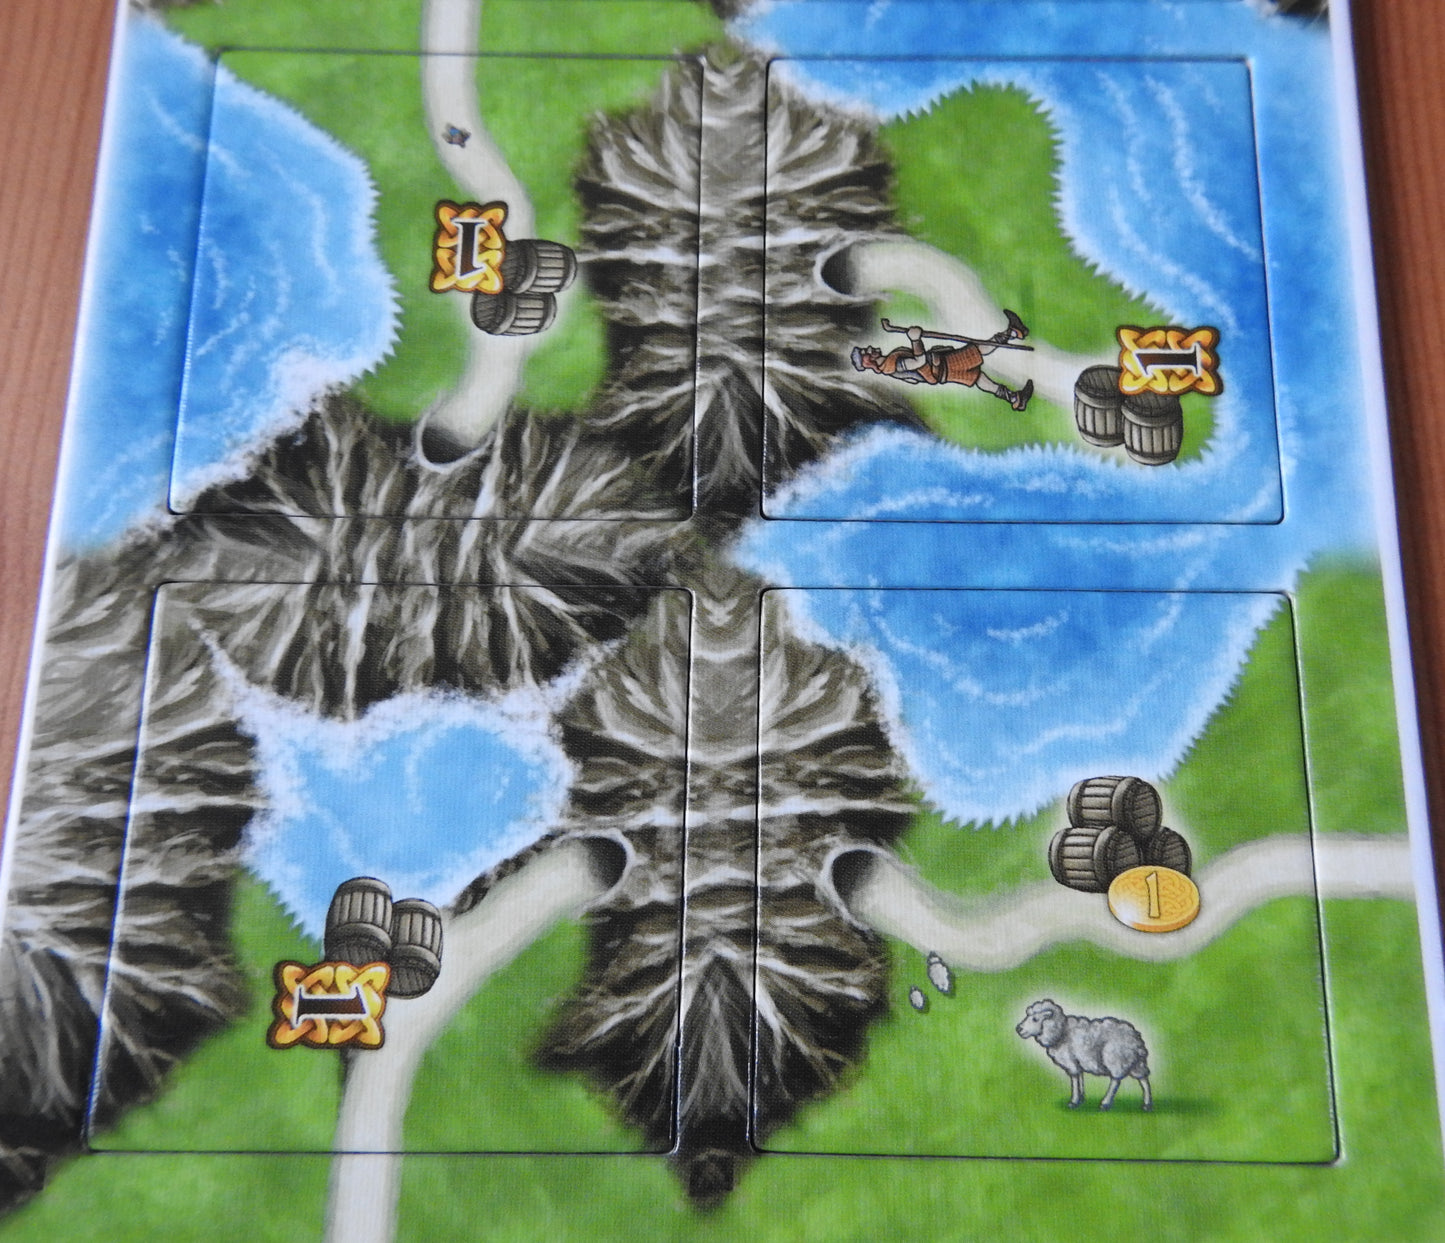 Close-up view of some of the tiles, showing tunnels going through mountains, with lochs inbetween.